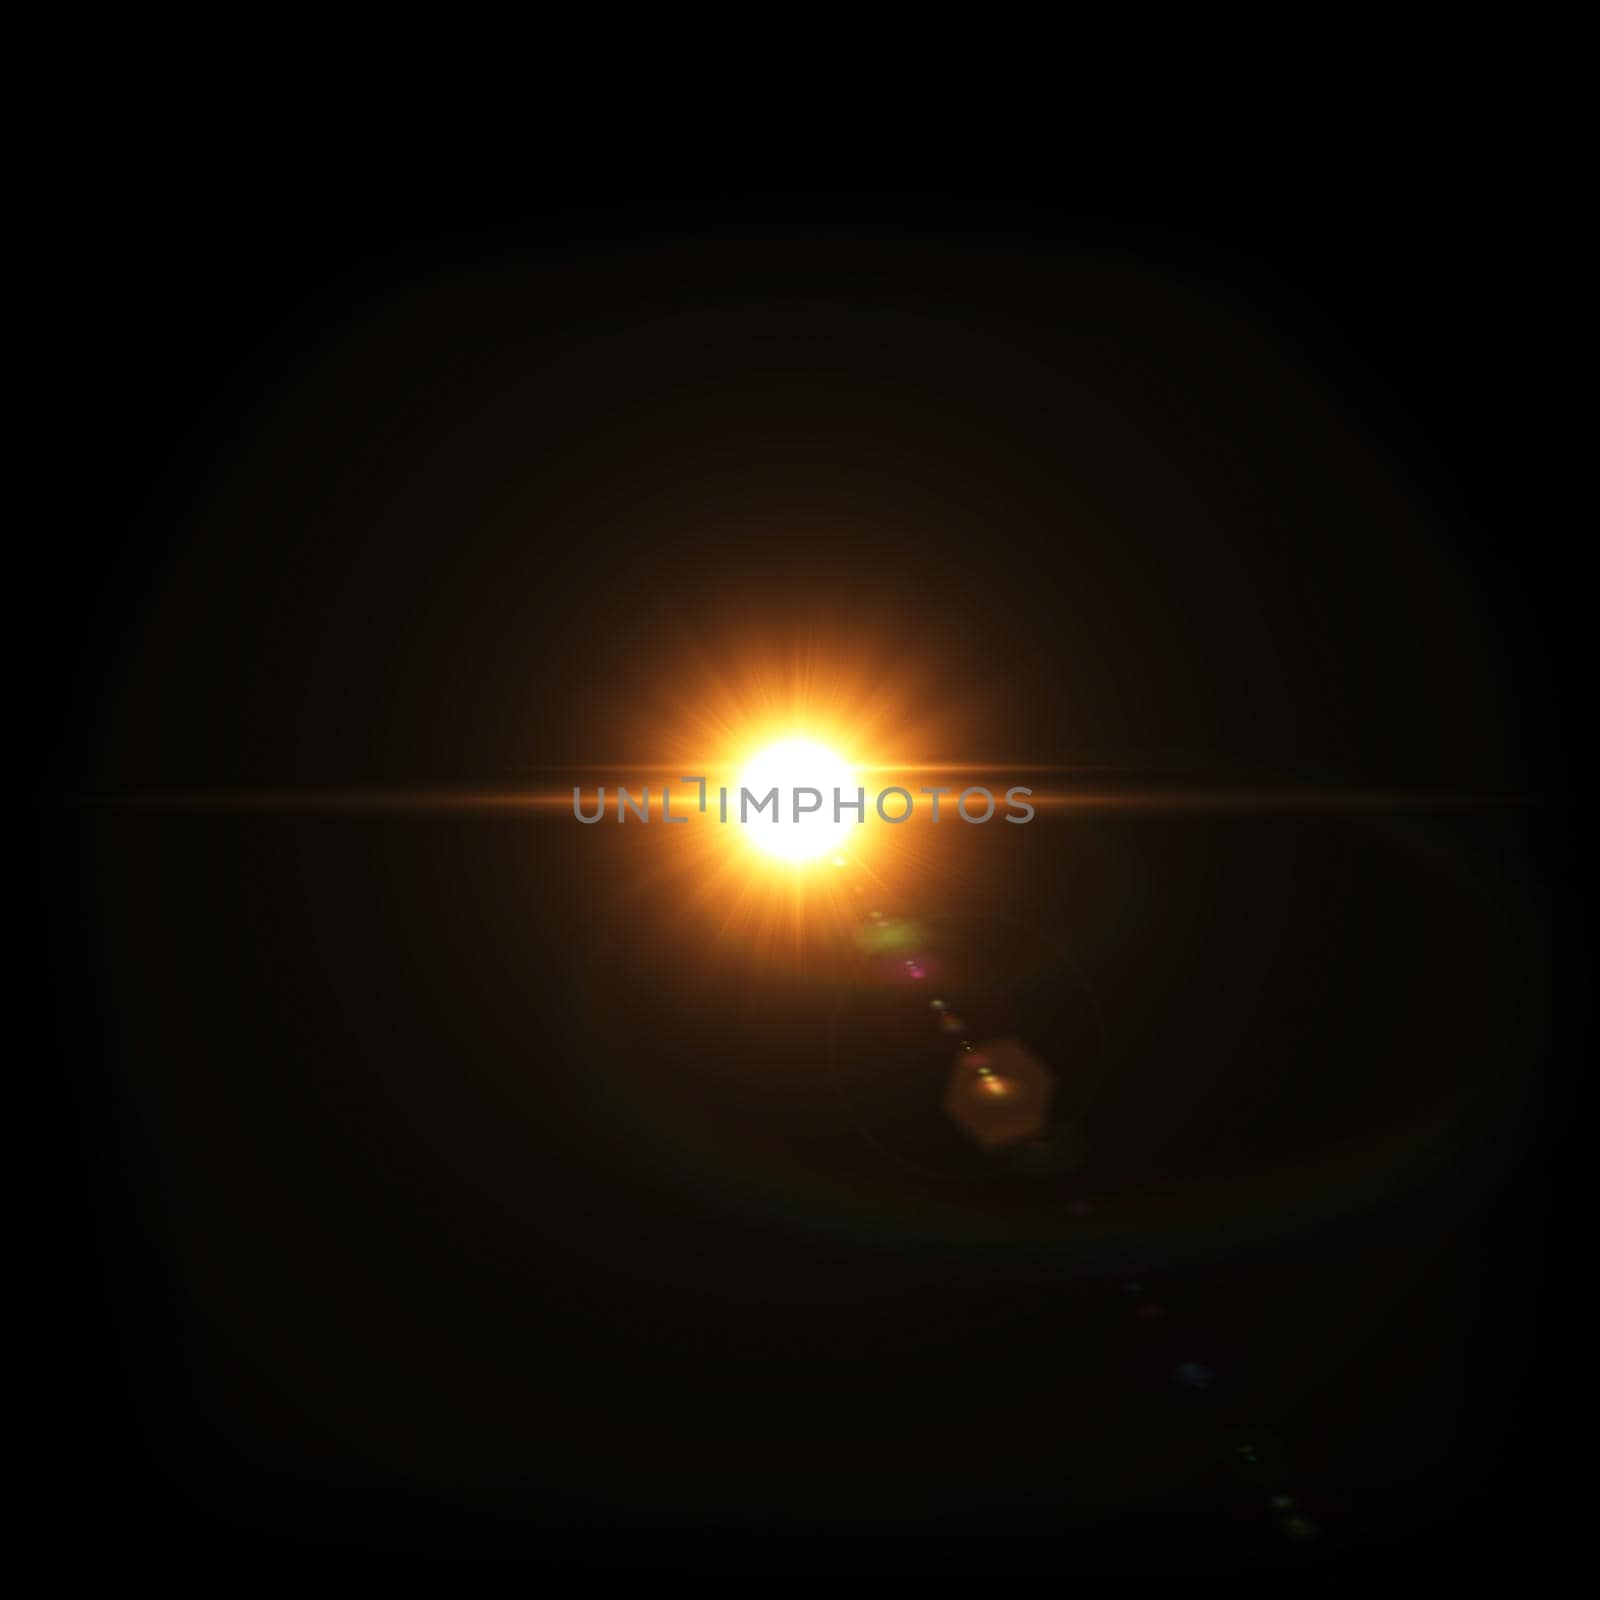 Light Lens flare on black background. Lens flare with bright light isolated with a black background. Used for textures and materials.